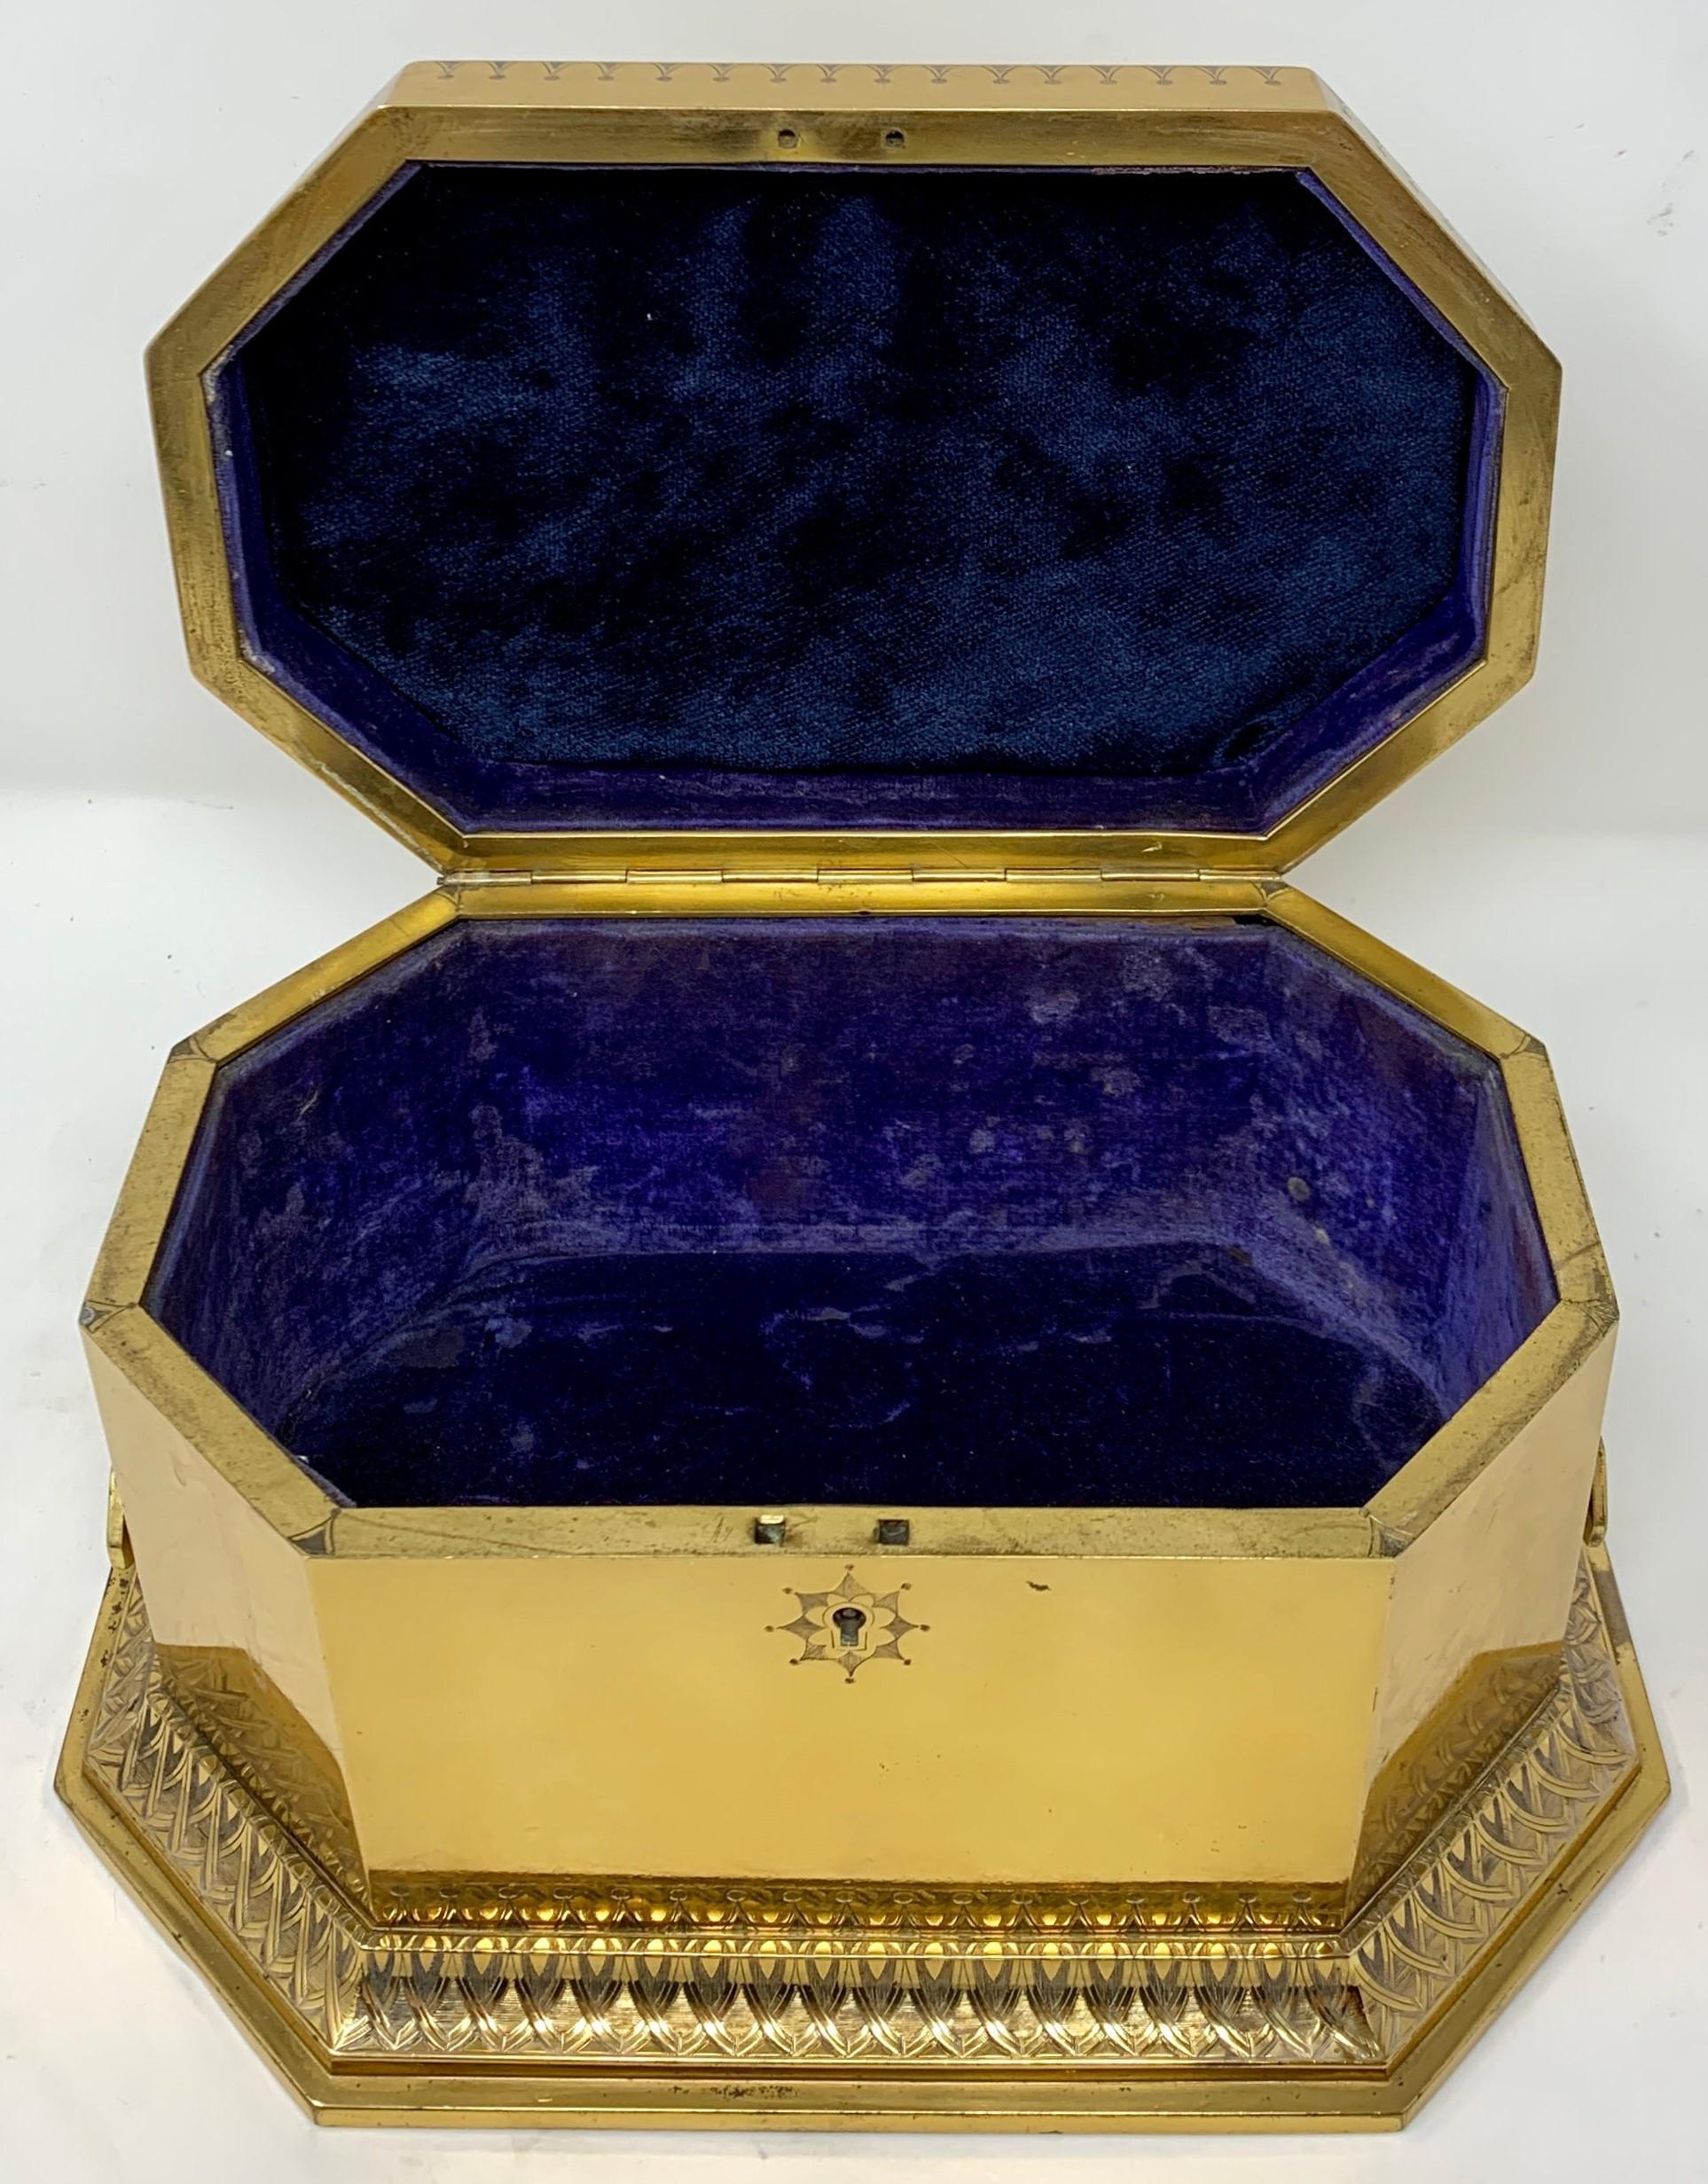 This little jewel box is sure to please anyone who purchases or receives it.
